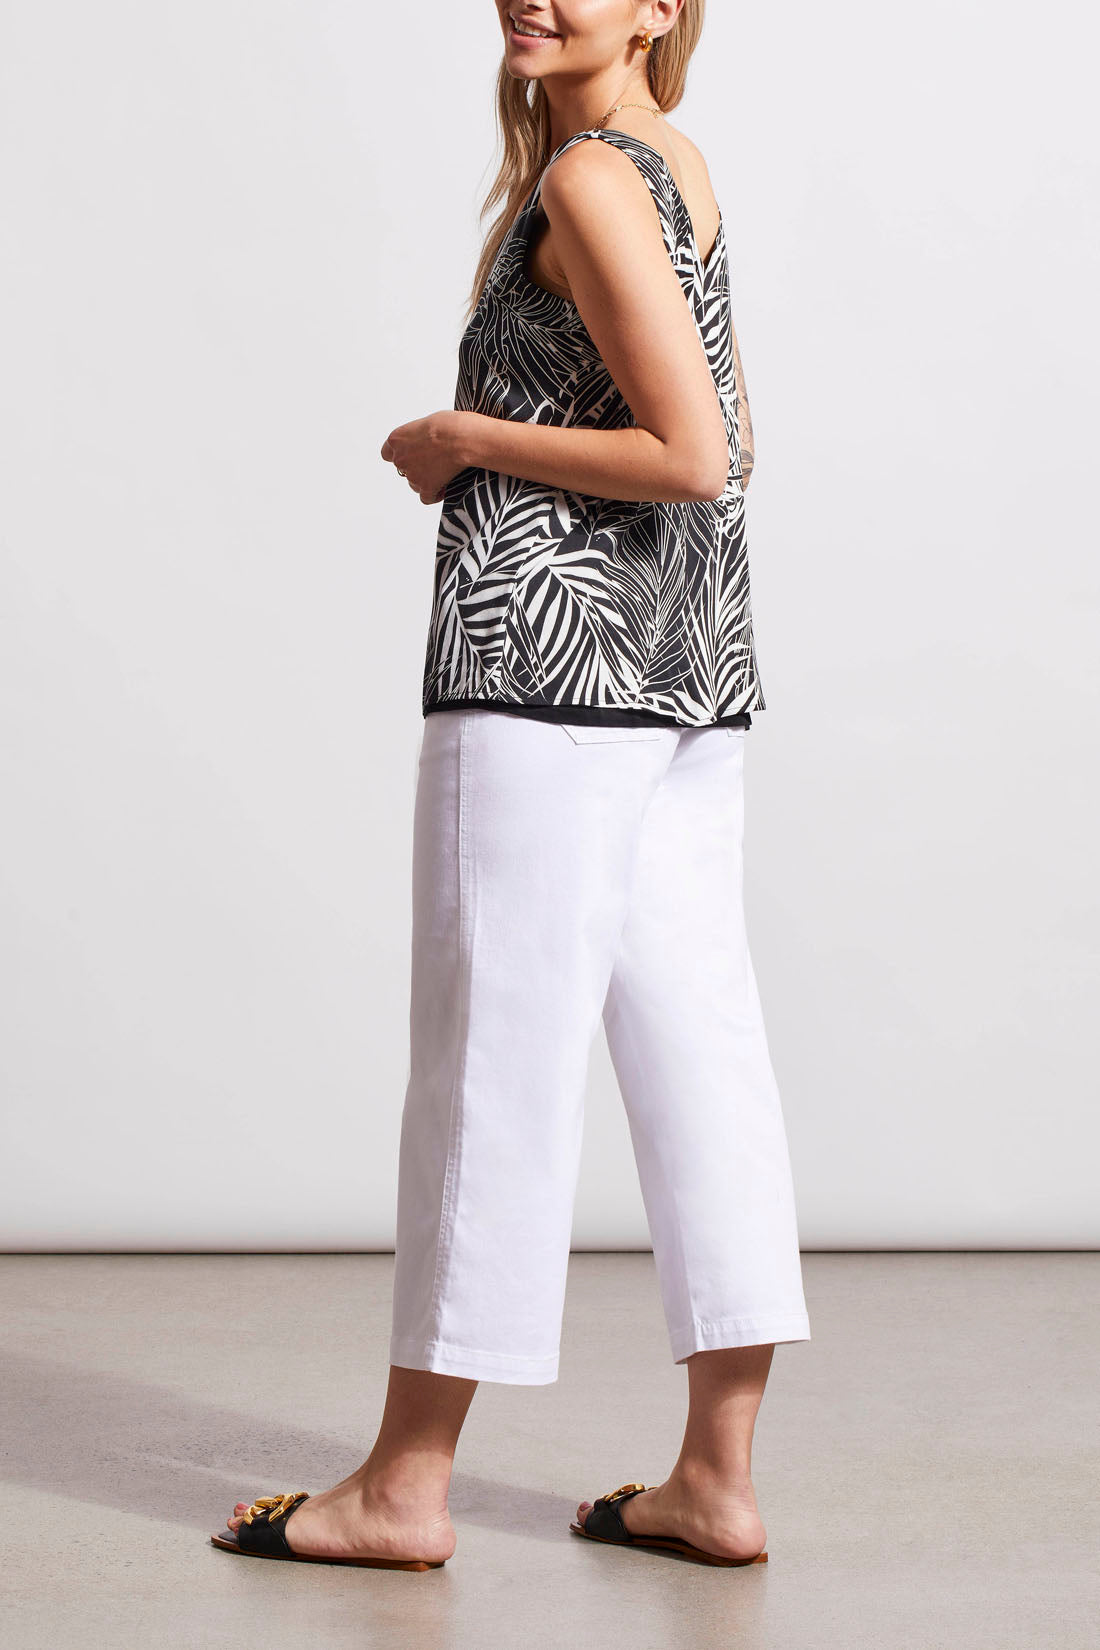 A woman wearing a Tribal reversible sleeveless V-Neck Cami top and white capri pants with slip-on sandals.